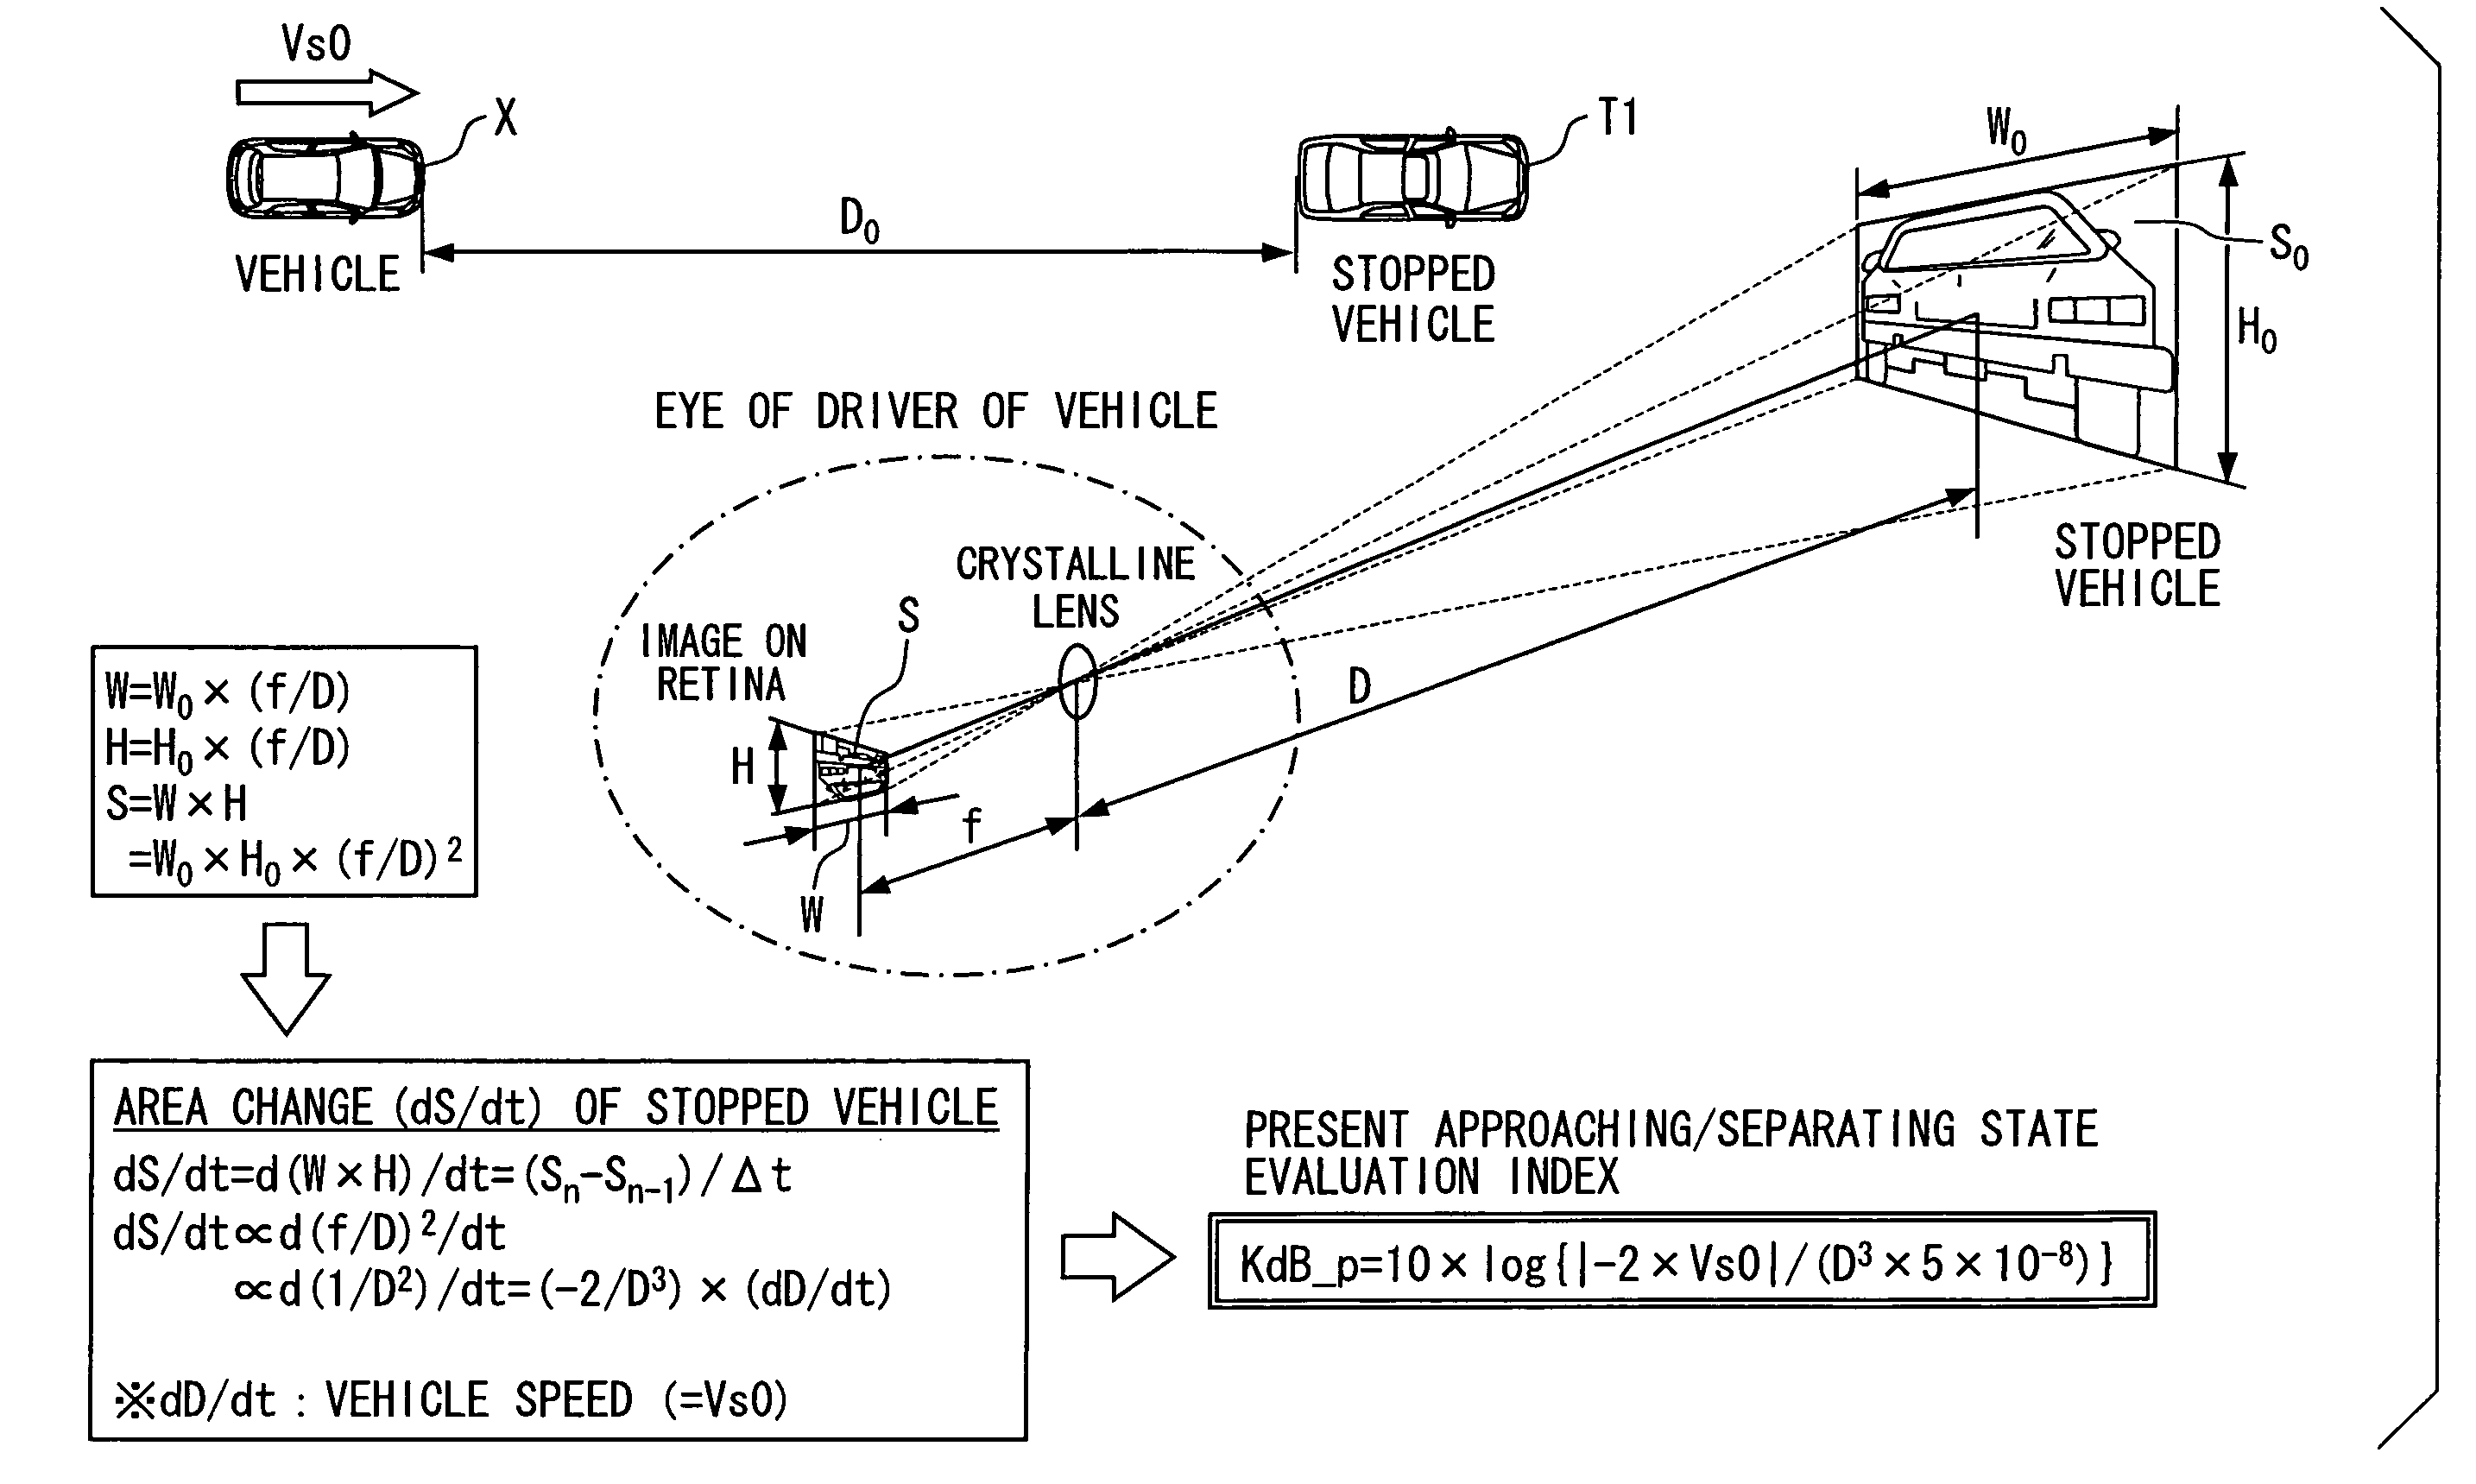 Target speed control system for a vehicle